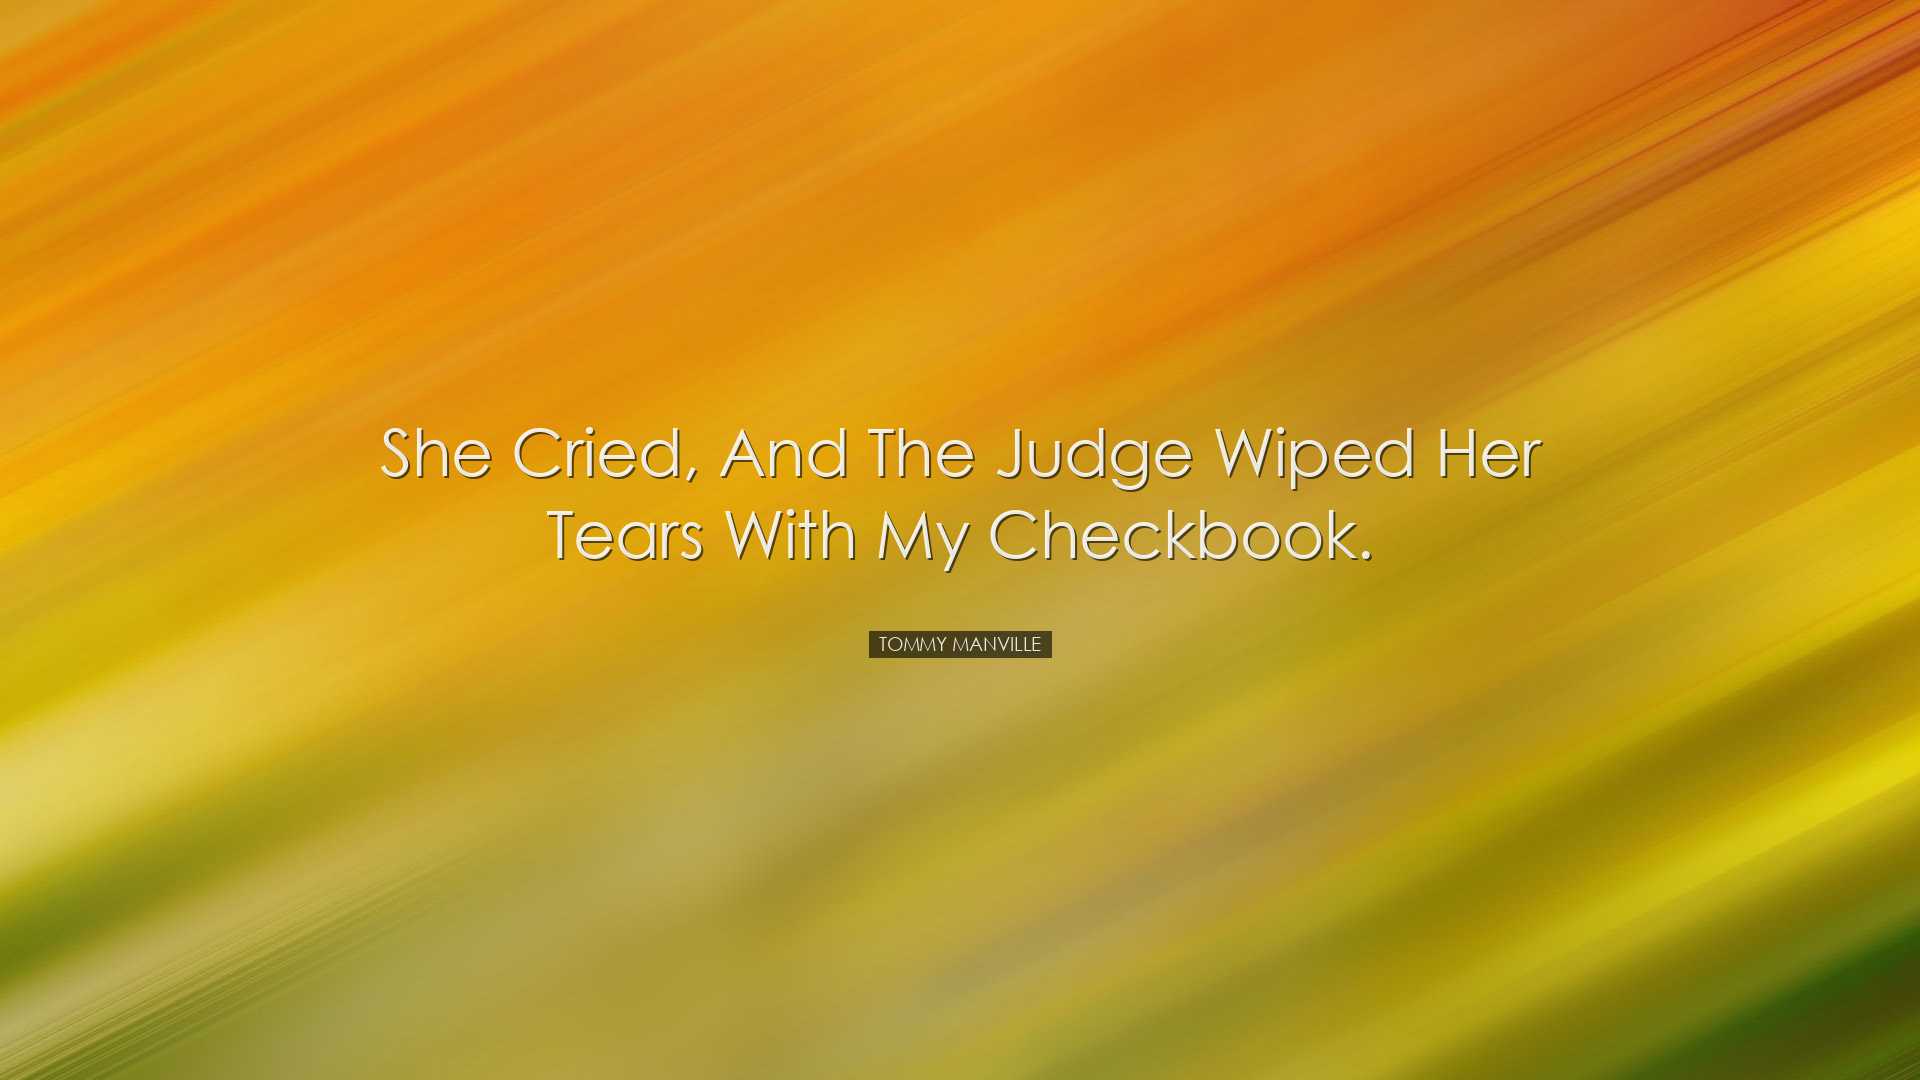 She cried, and the judge wiped her tears with my checkbook. - Tomm